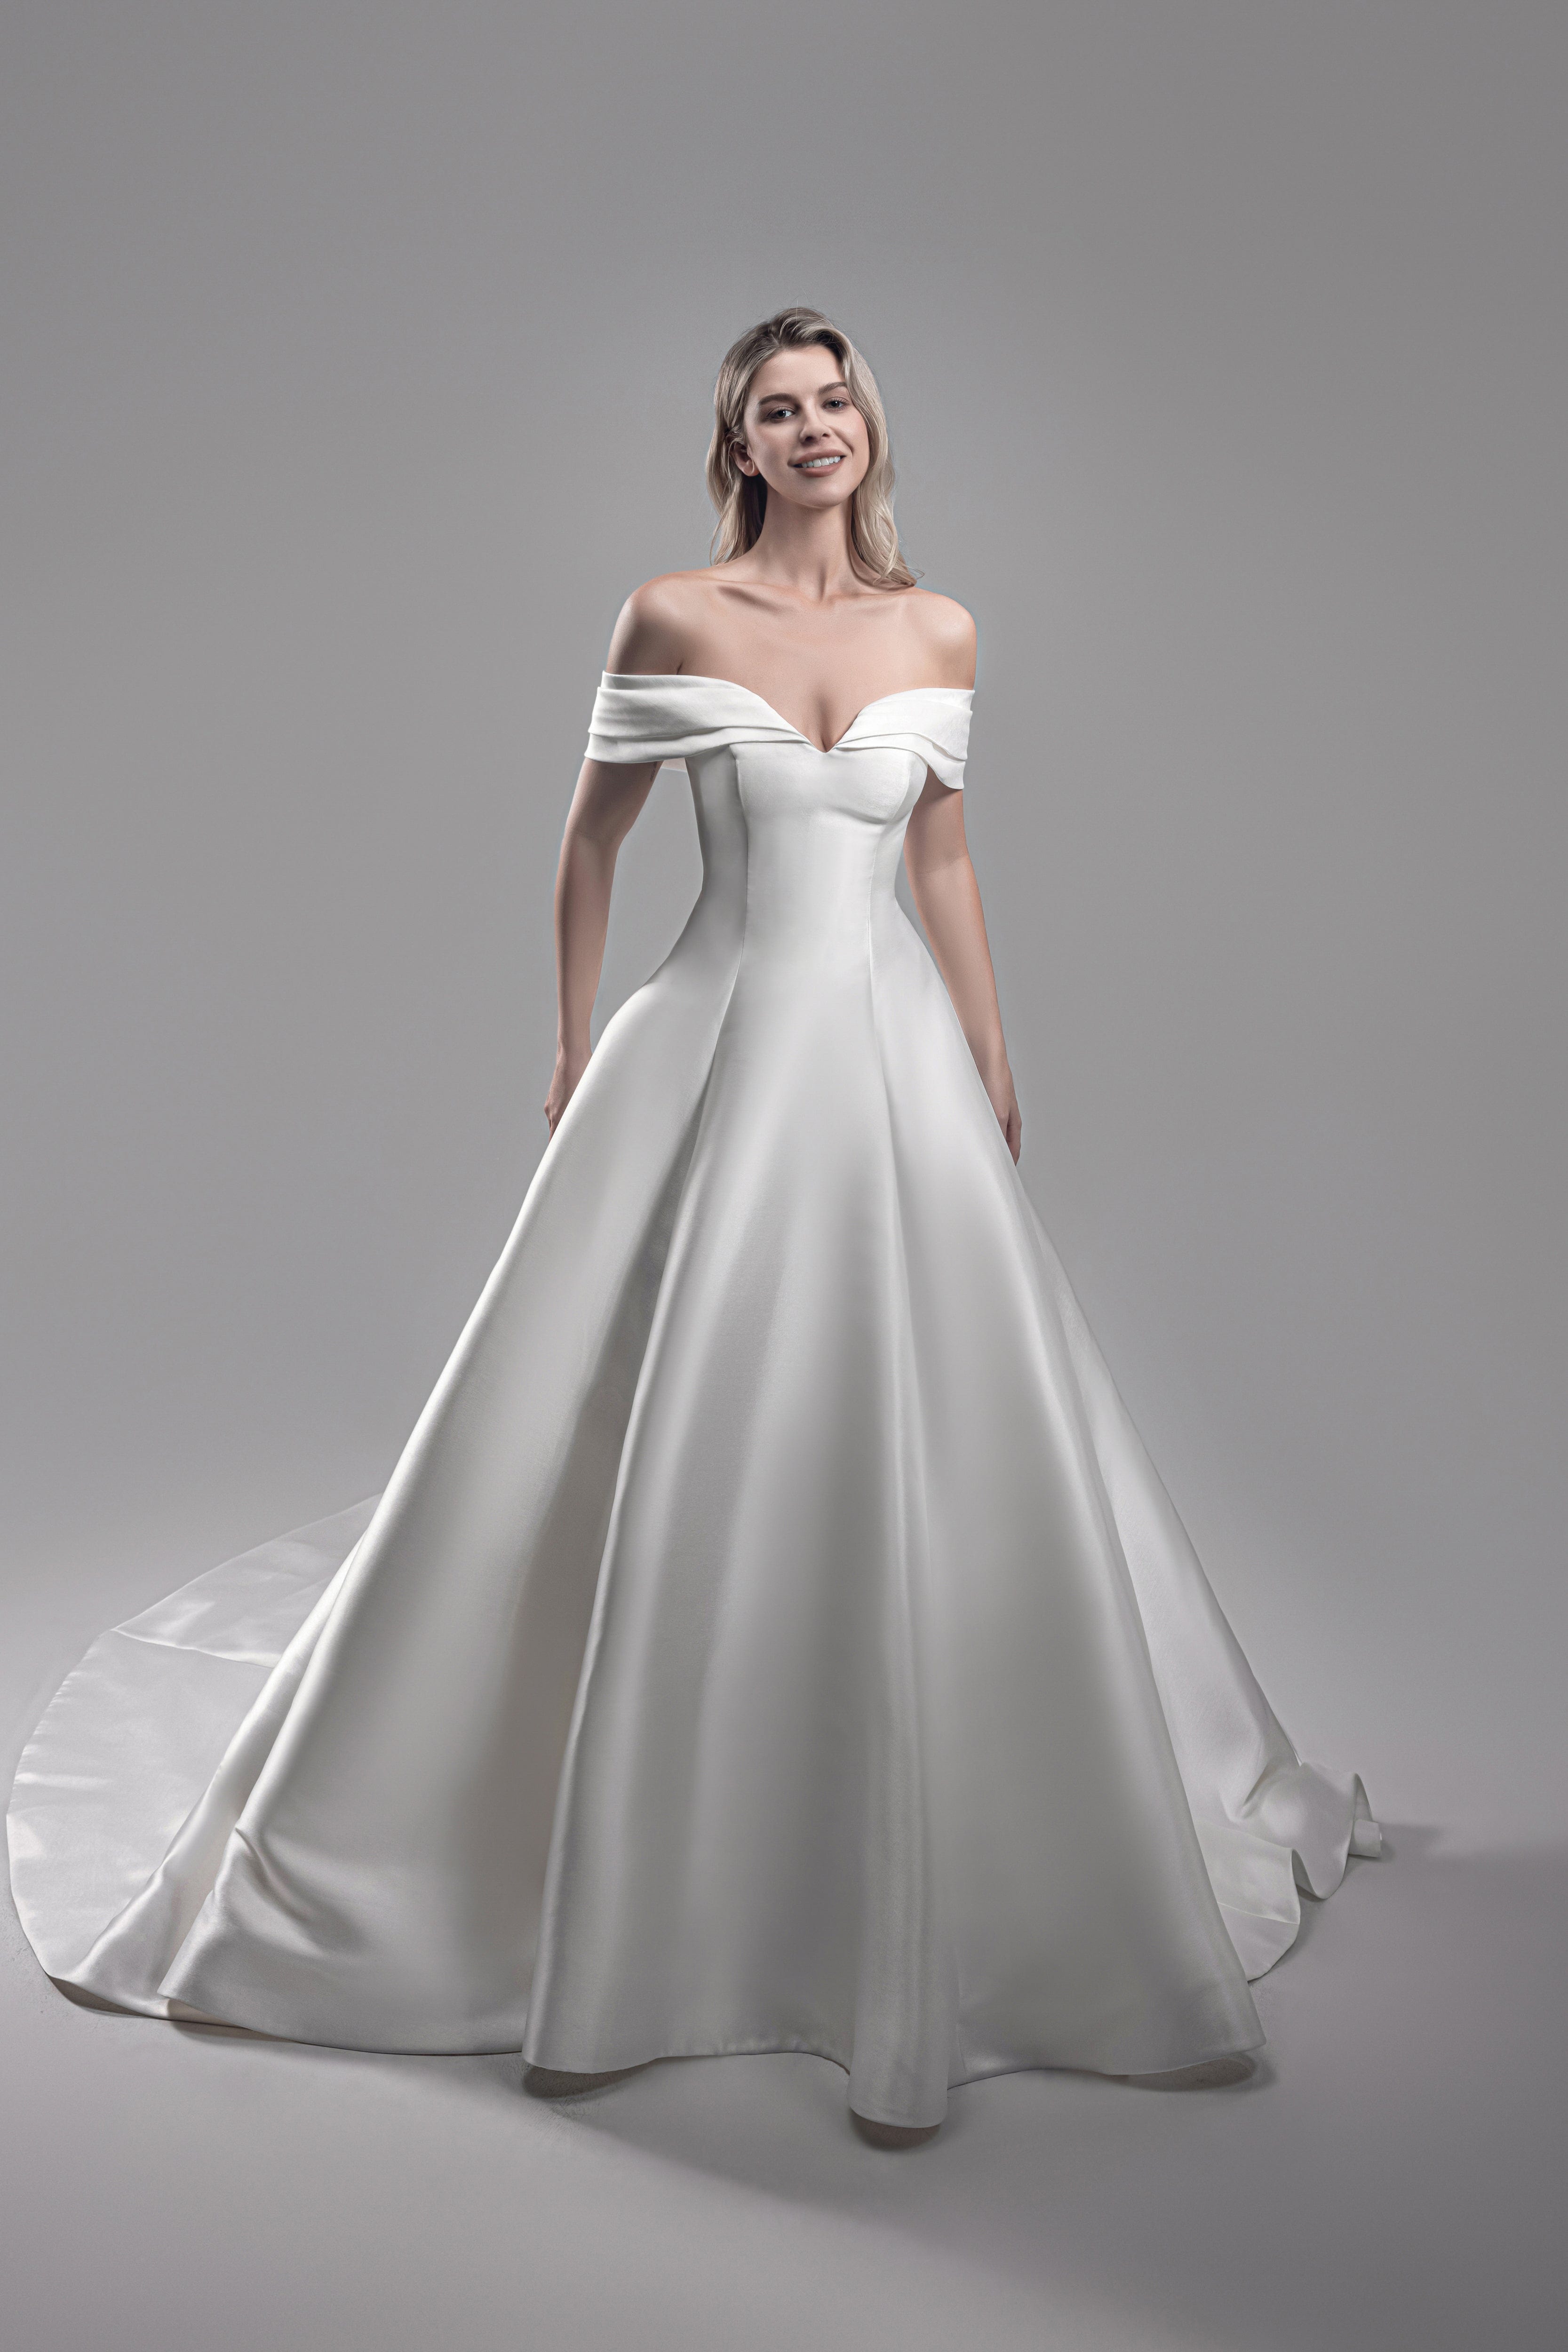 Designer Sample Sale, Never Worn Gowns at Amazingly Low Prices – Halo by  Lovely Bride